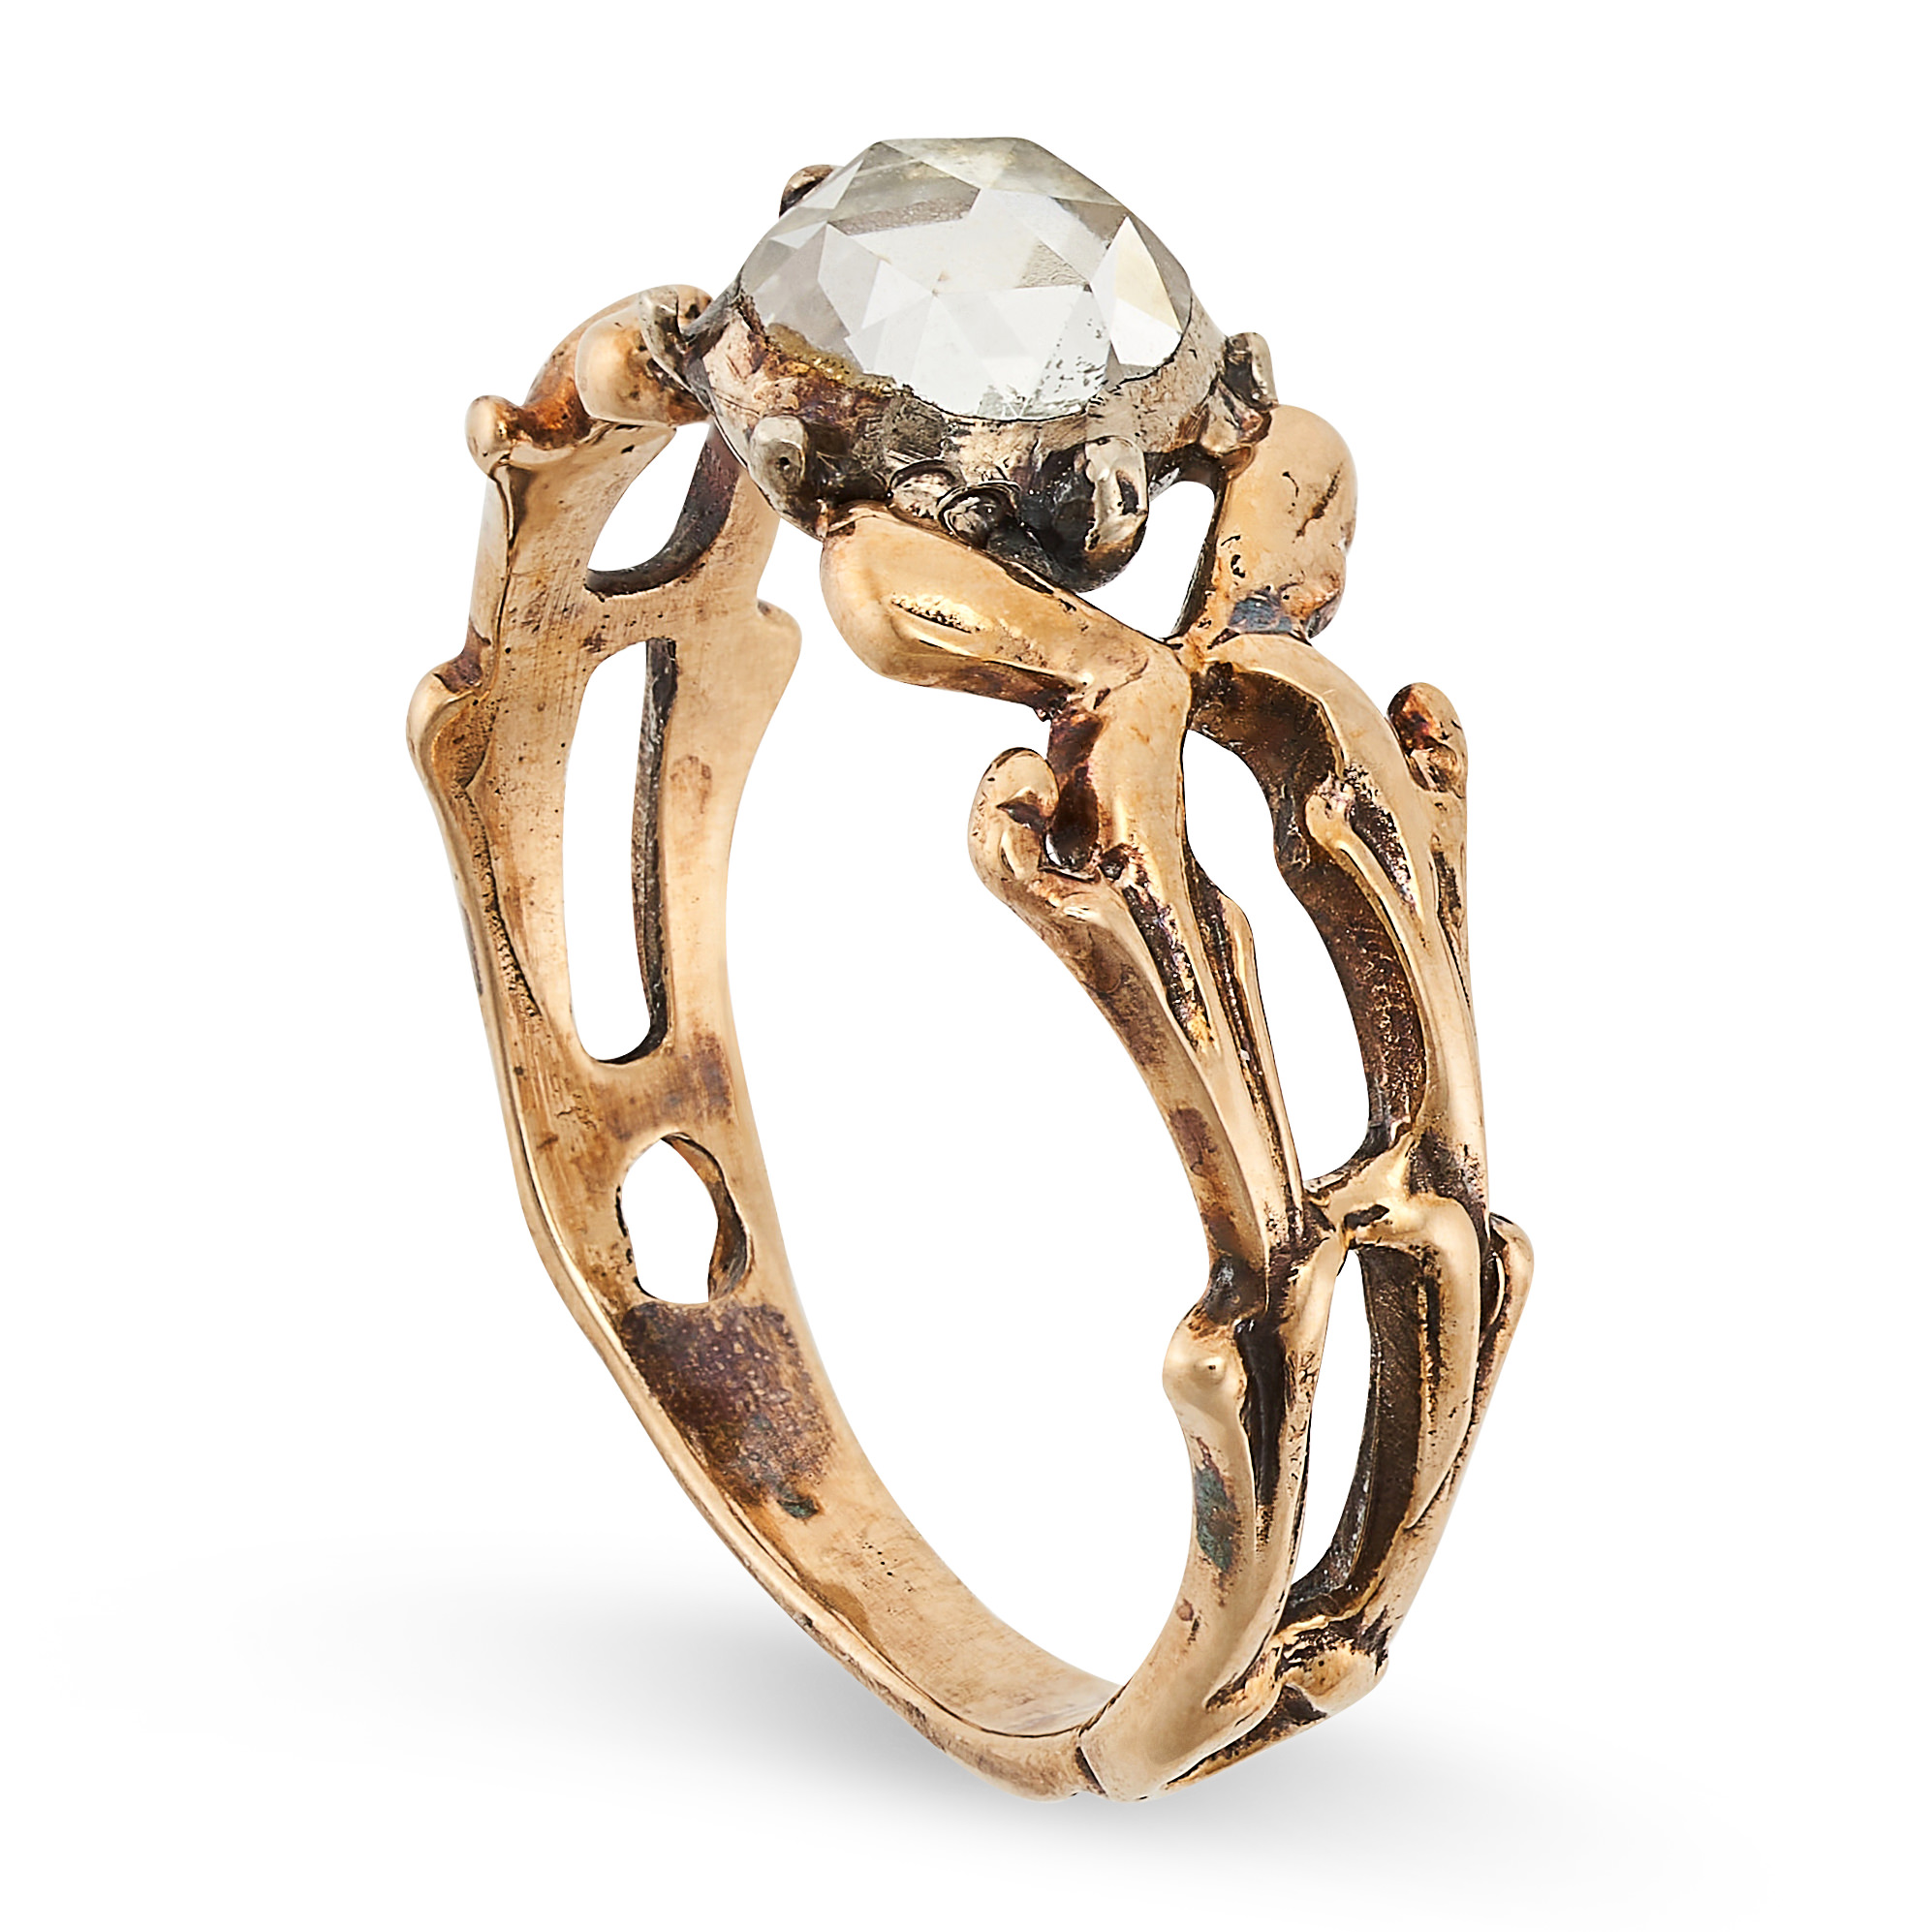 AN ANTIQUE DIAMOND SOLITAIRE in yellow gold and silver, set with a rose cut diamond on a stylised